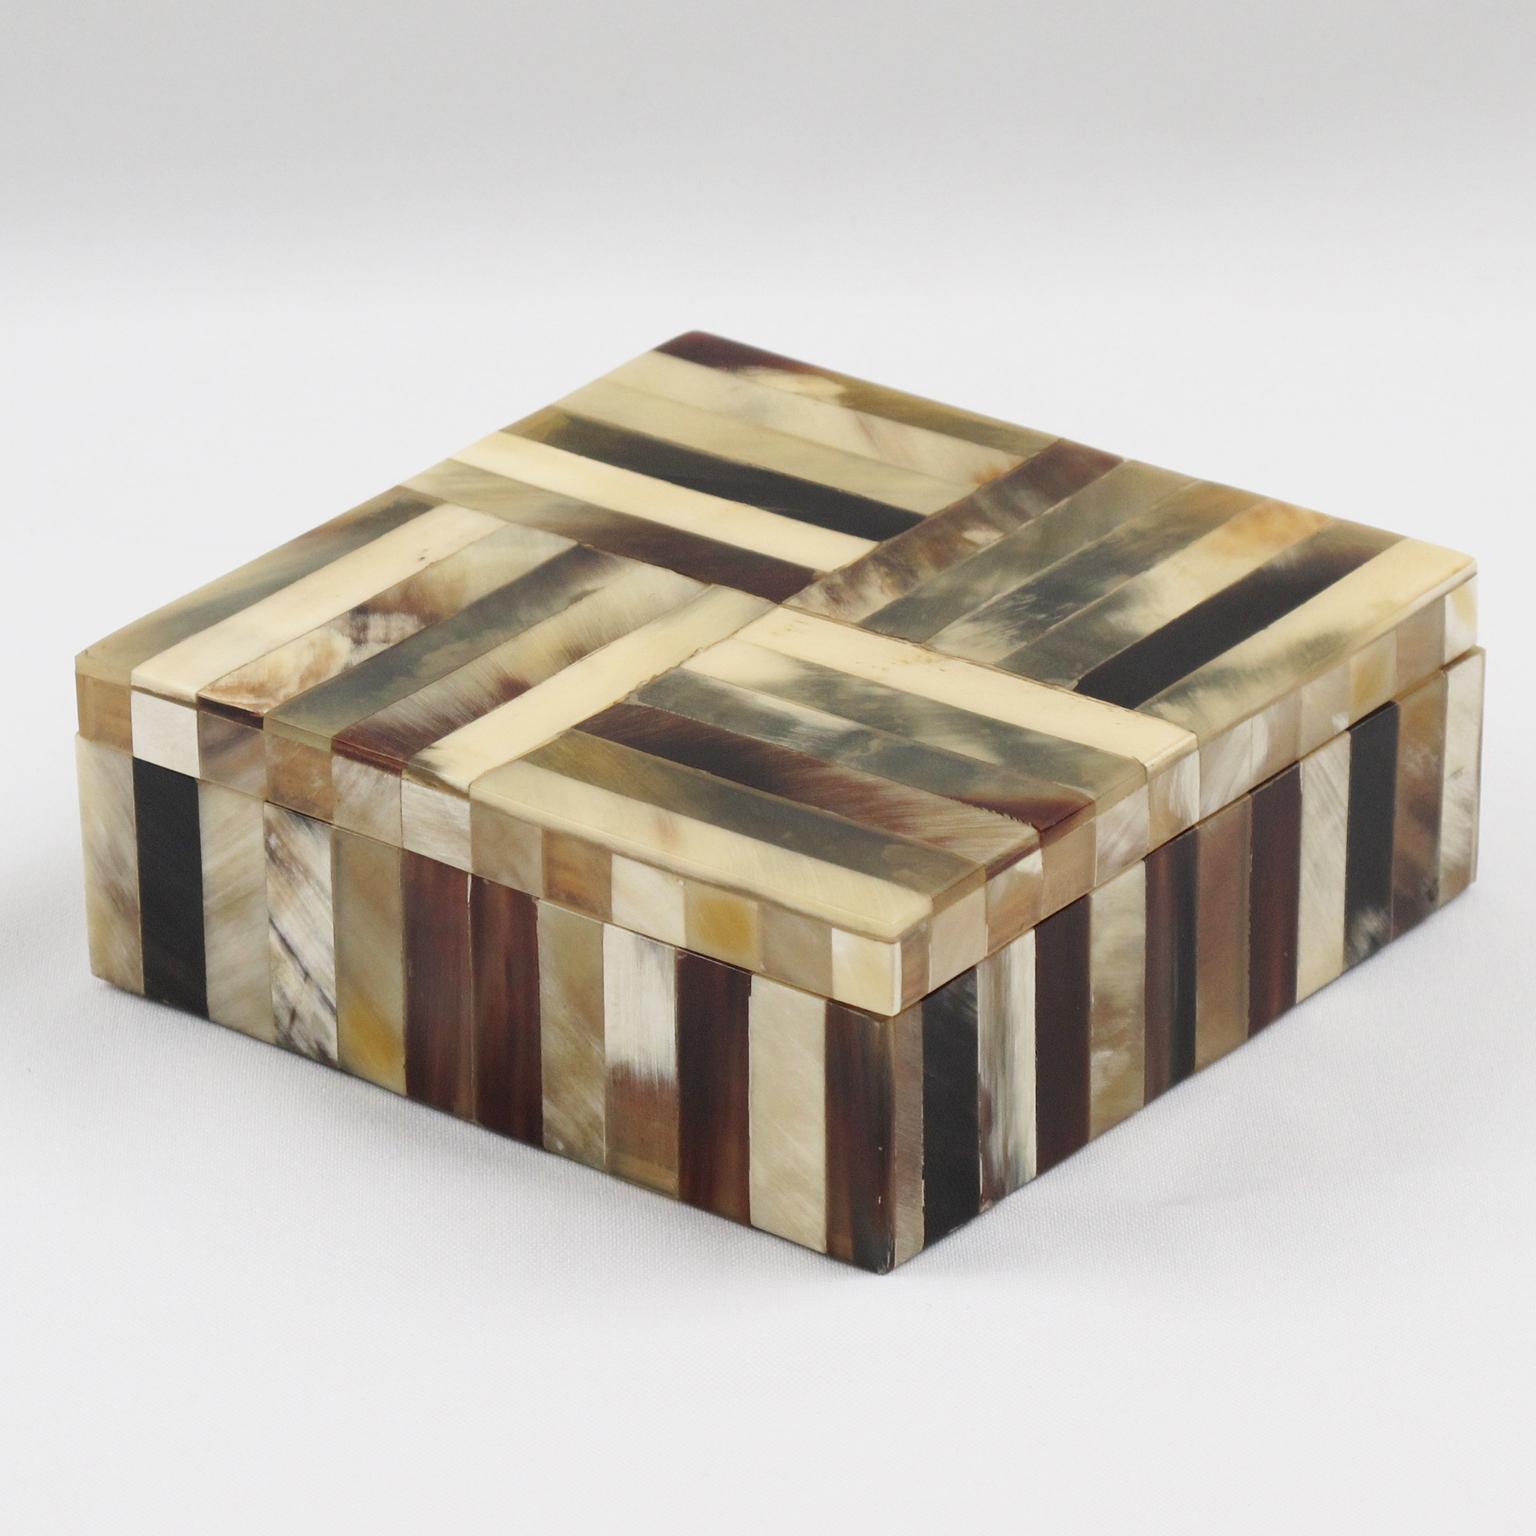 Elegant 1960s lidded decorative box in real horn. Square shape with solid mahogany wood interior and geometric horn marquetry patchwork. Lovely art work with multi-toned real horn. 
Measurements: 4.94 in. wide (12.5 cm) x 4.94 in. deep (12.5 cm) x